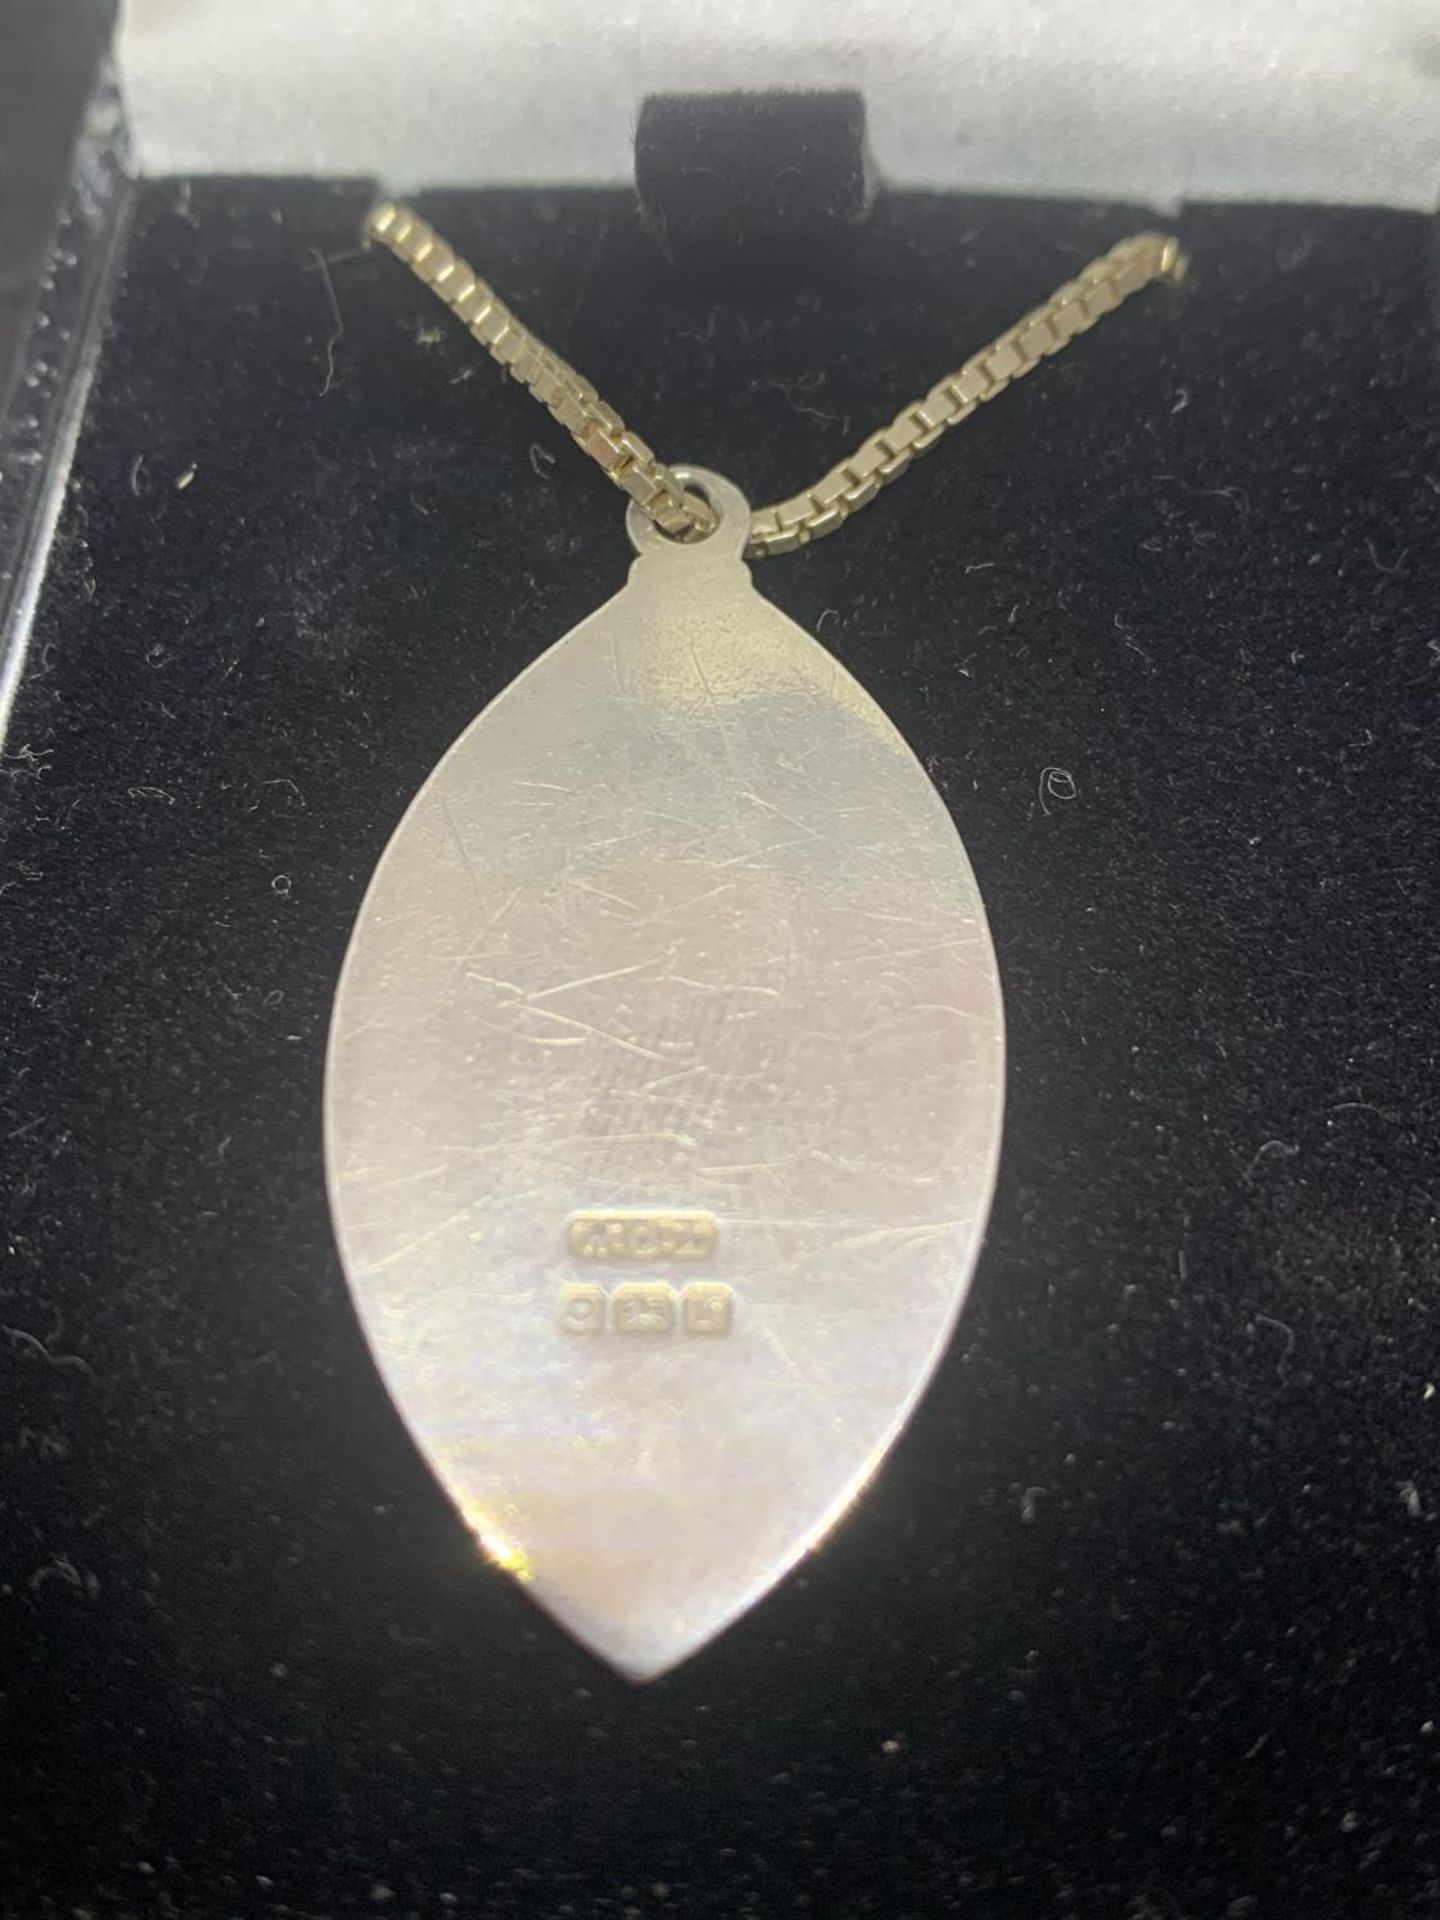 A SILVER NECKLACE WITH A FELLOWSHIP OF RECONCILIATION PENDANT IN A PRESENTATION BOX - Image 3 of 3